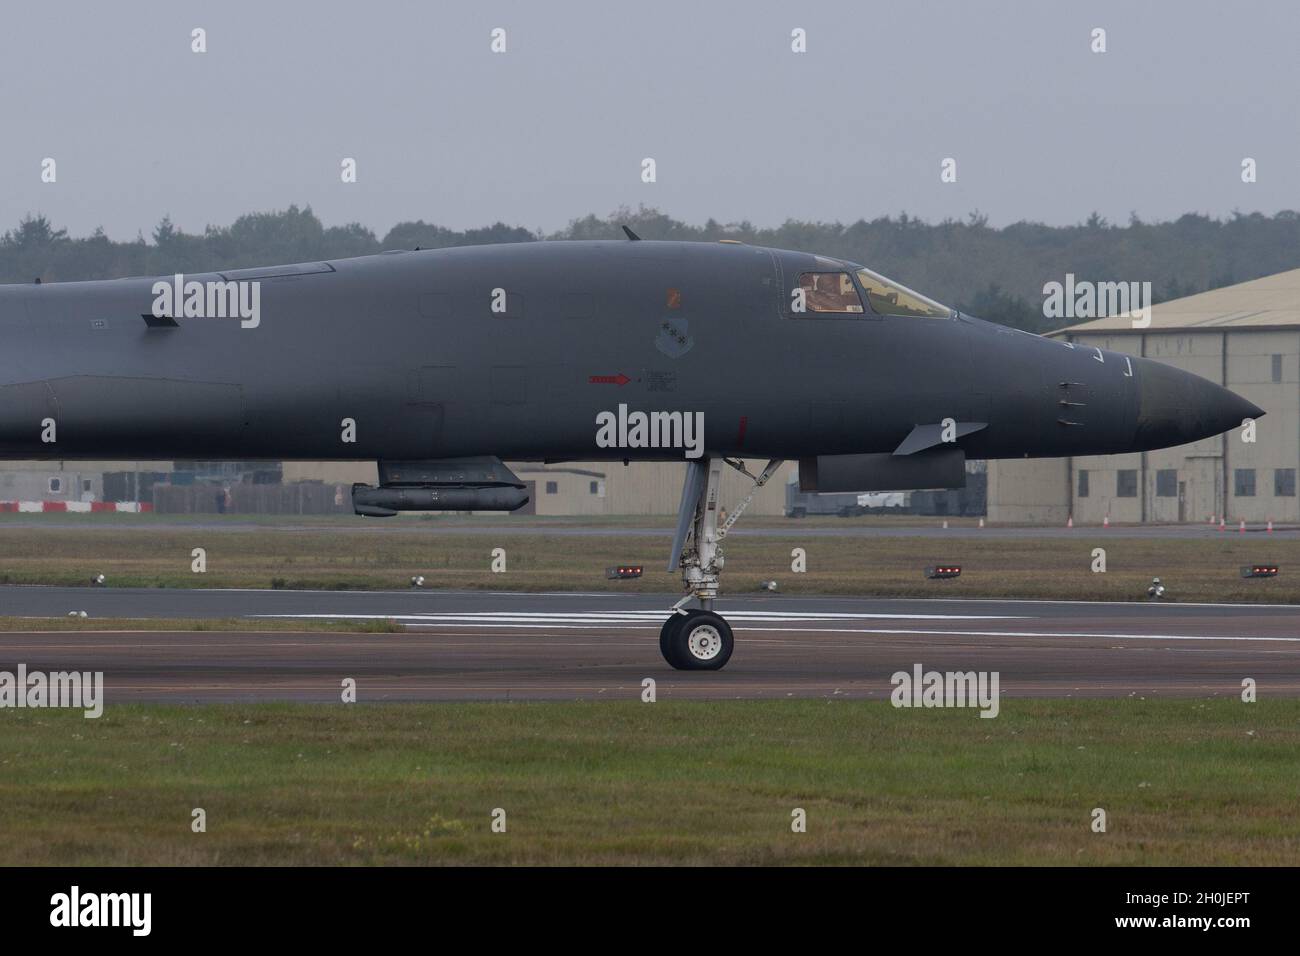 RAF FAIRFORD, KEMPSFORD, GLOUCESTERSHIRE, ENGLAND, WEDNESDAY 13TH OCTOBER 2021 : A United States Air Force B1 Bomber takes off from RAF Fairford in Gloucestershire, England on Saturday 11th September 2021. (Credit: Robert Smith | MI News ) Credit: MI News & Sport /Alamy Live News Stock Photo